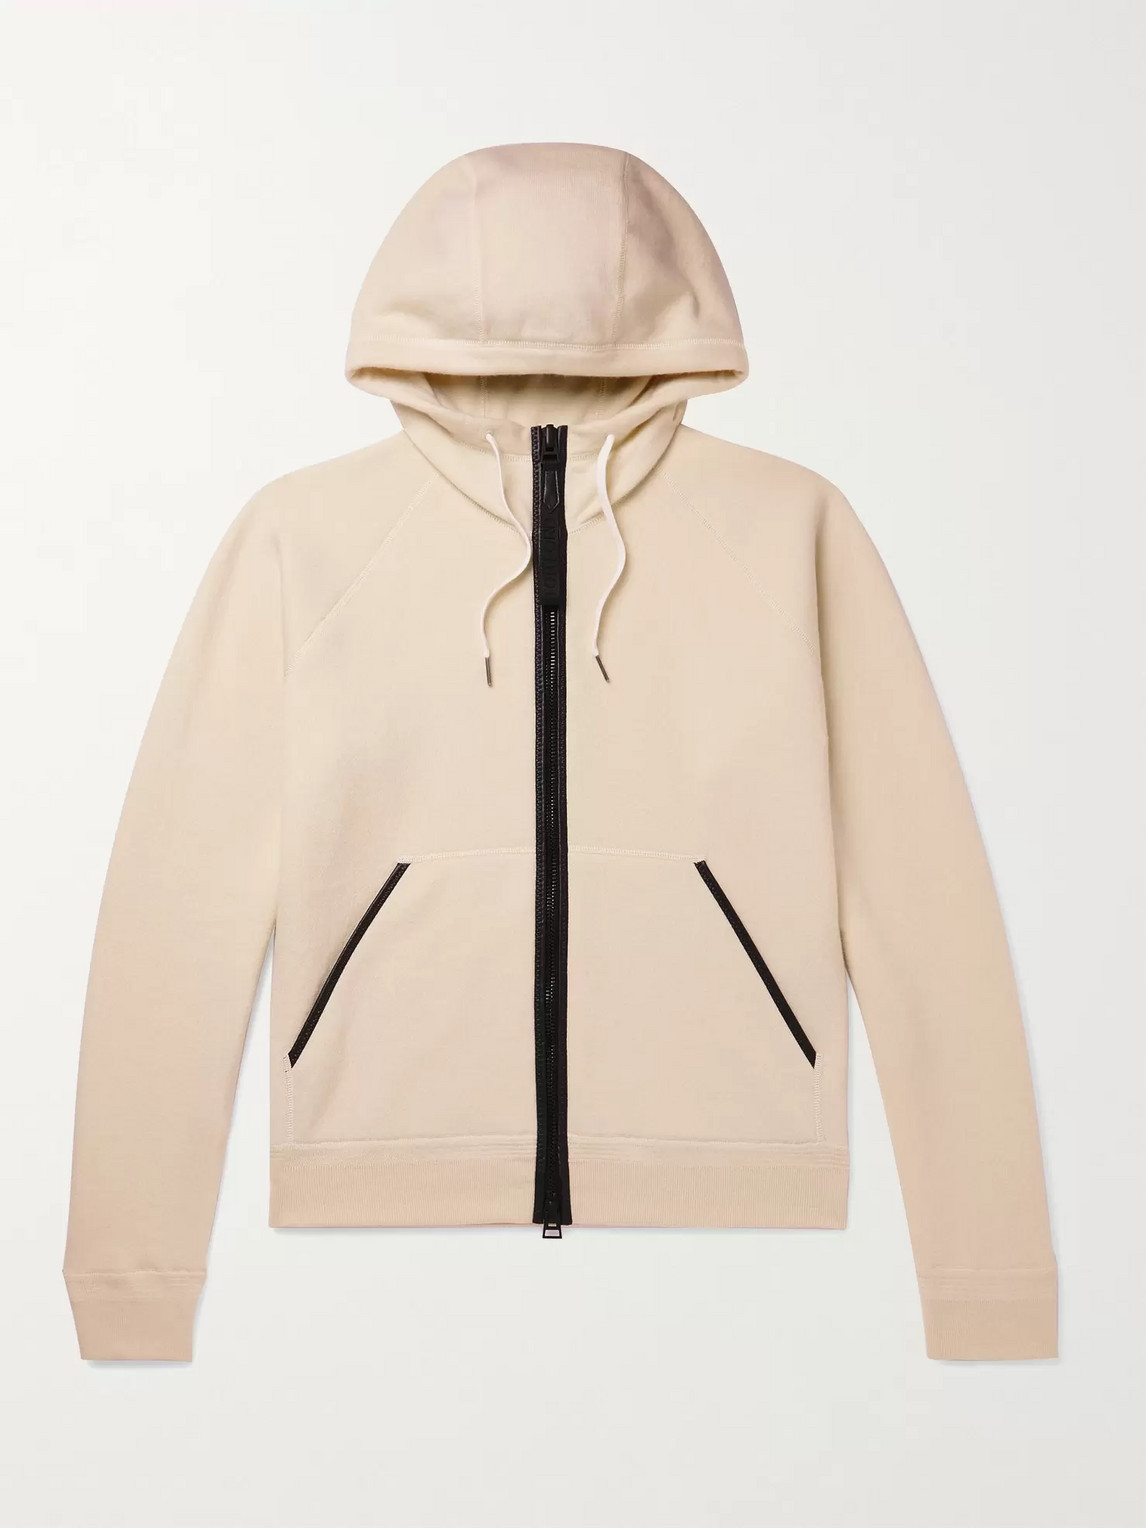 TOM FORD LEATHER-TRIMMED CASHMERE-BLEND ZIP-UP HOODIE